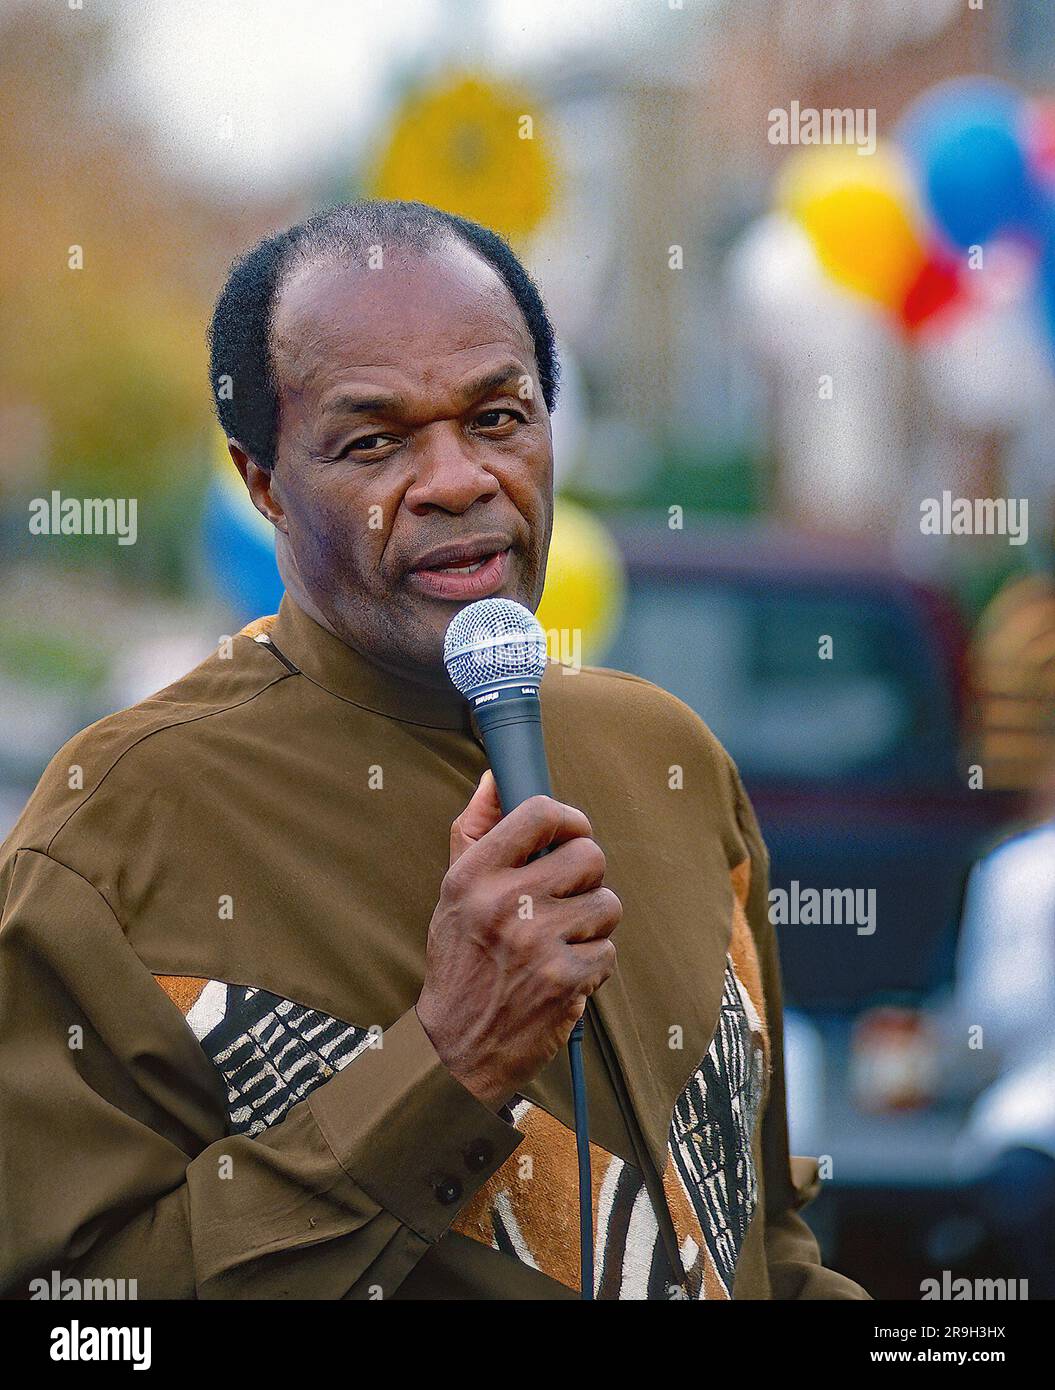 WASHINGTON DC - NOVEMBER 8, 1994Marion Barry the ward 8 city councilman during his campaign for reelection as Mayor speaks to supporters on the street in Ward 8 on Election Day. He won the election and went on to serve a fourth term as Mayor . Credit: Mark Reinstein / MediaPunch Stock Photo